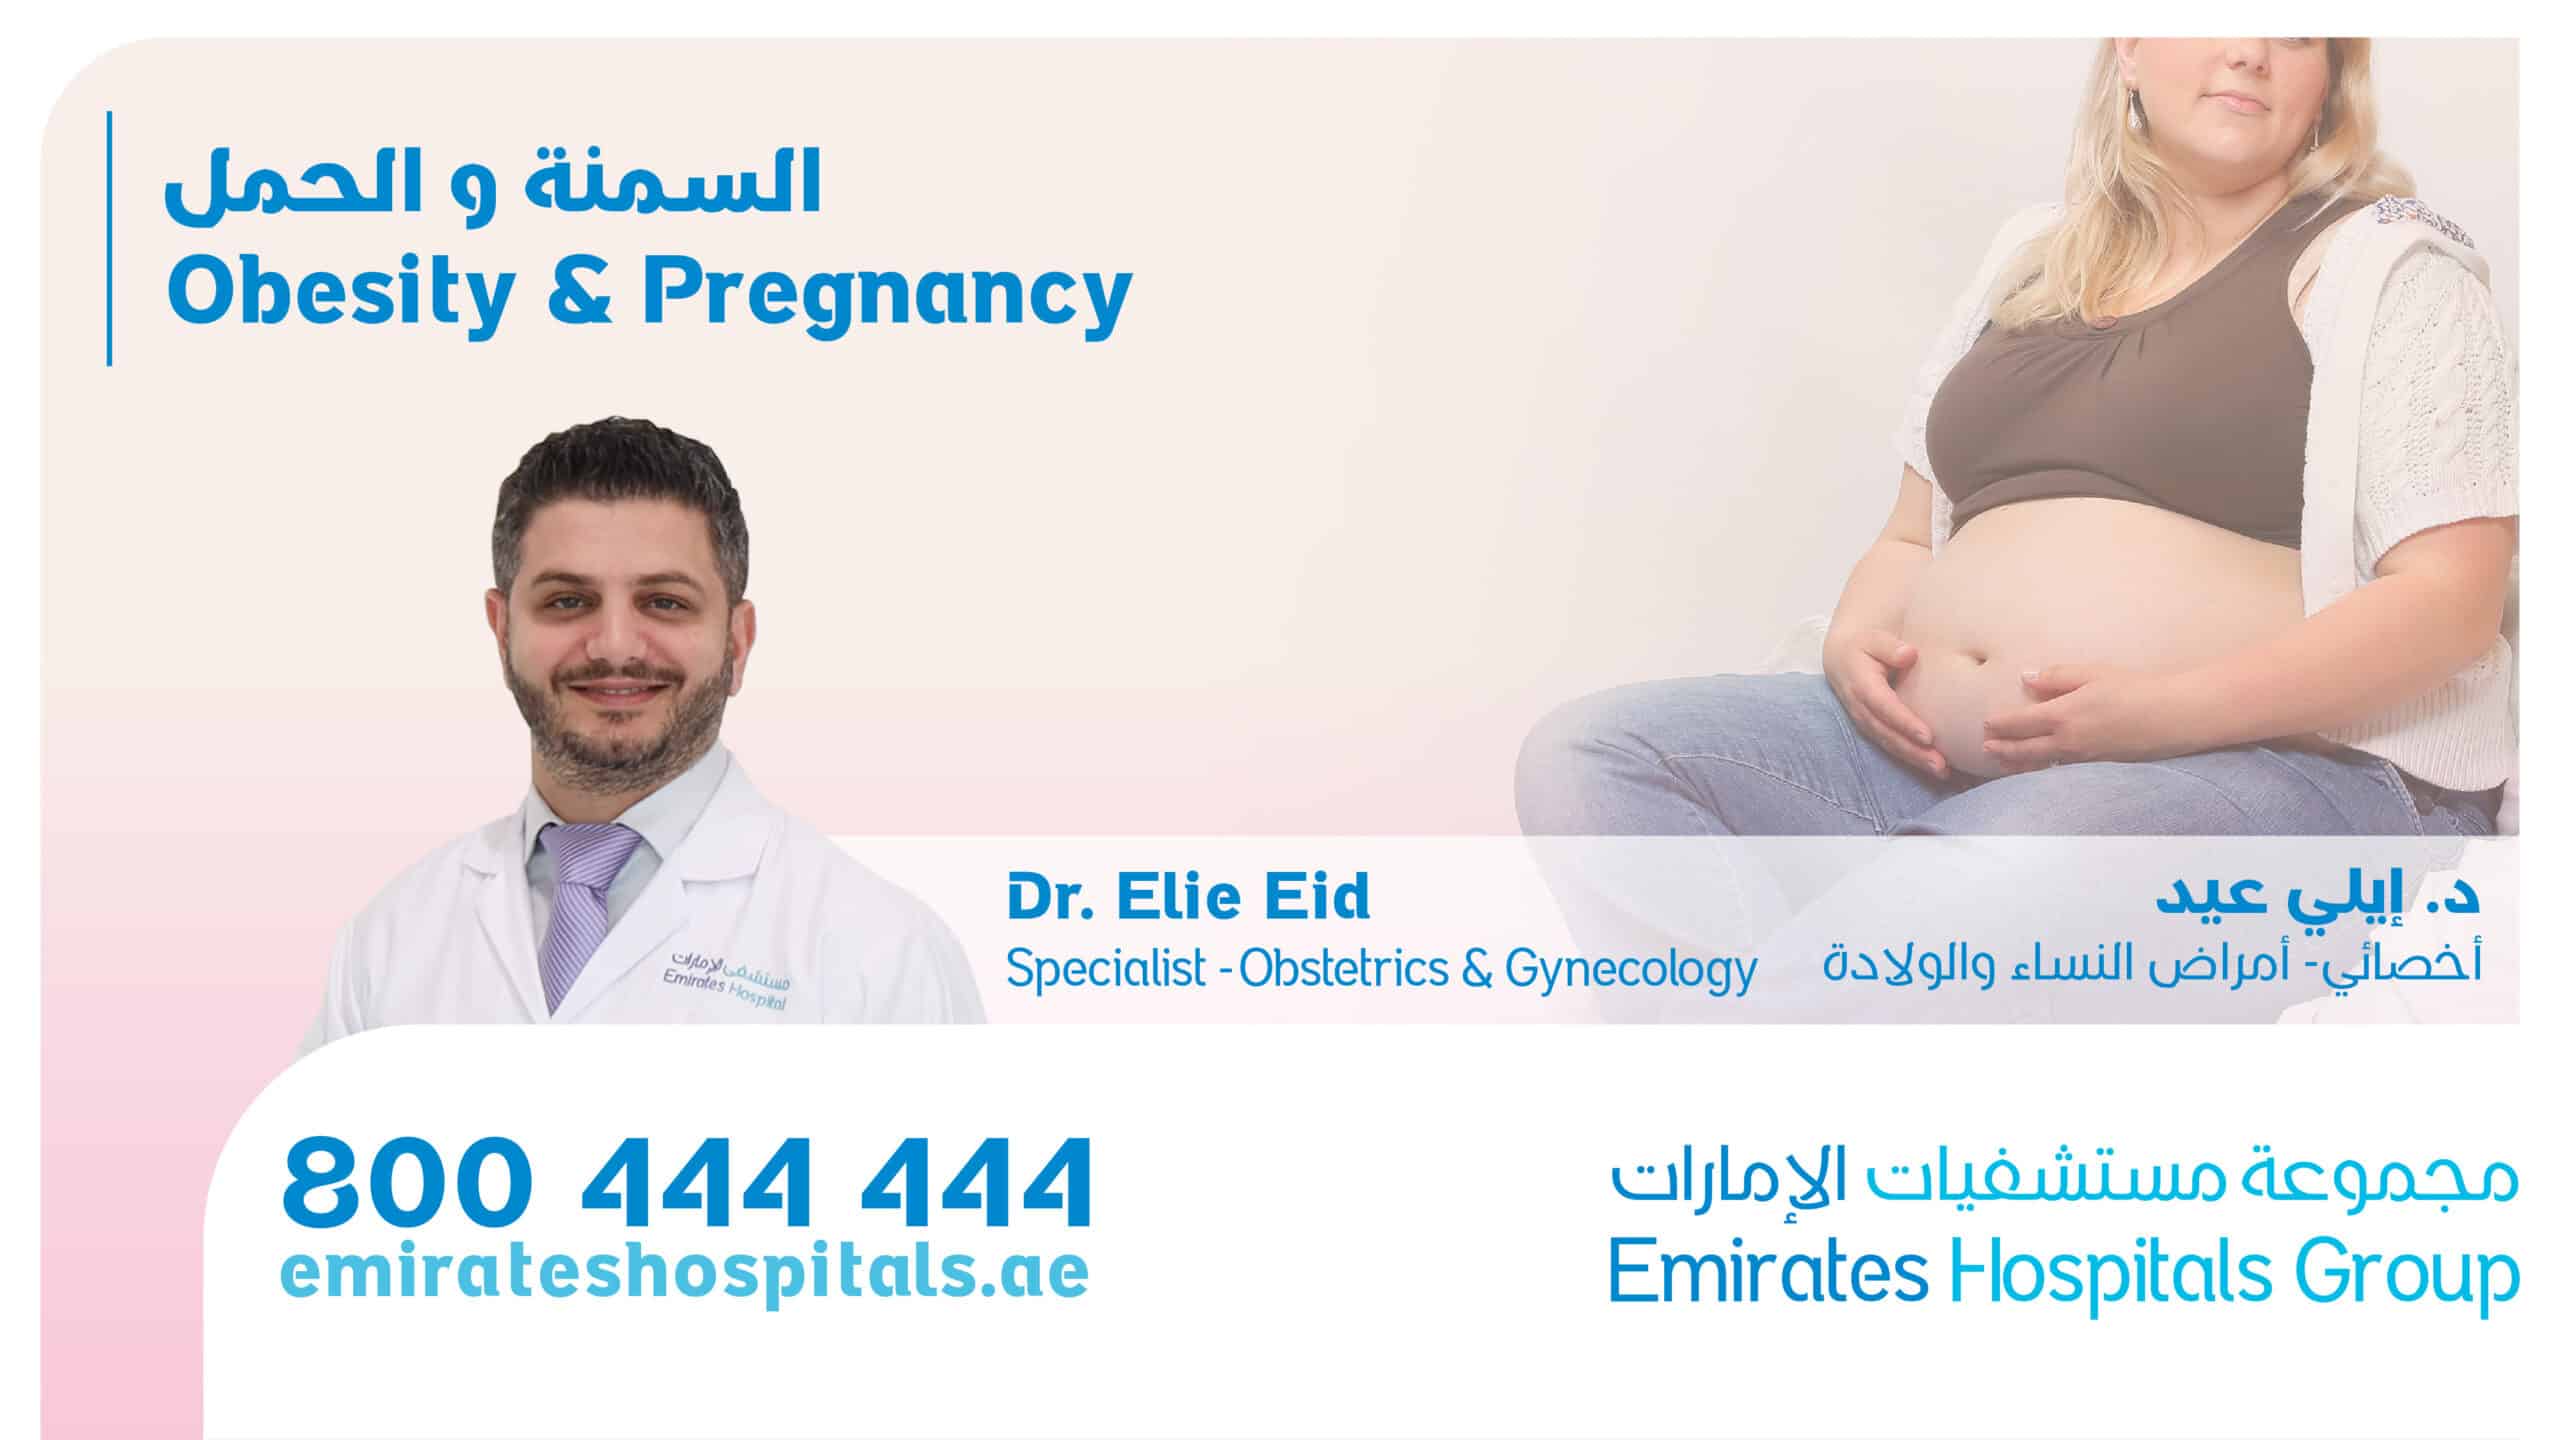 Obesity and Pregnancy - Dr. Elie Eid Specialist , Obstetrics and Gynecology